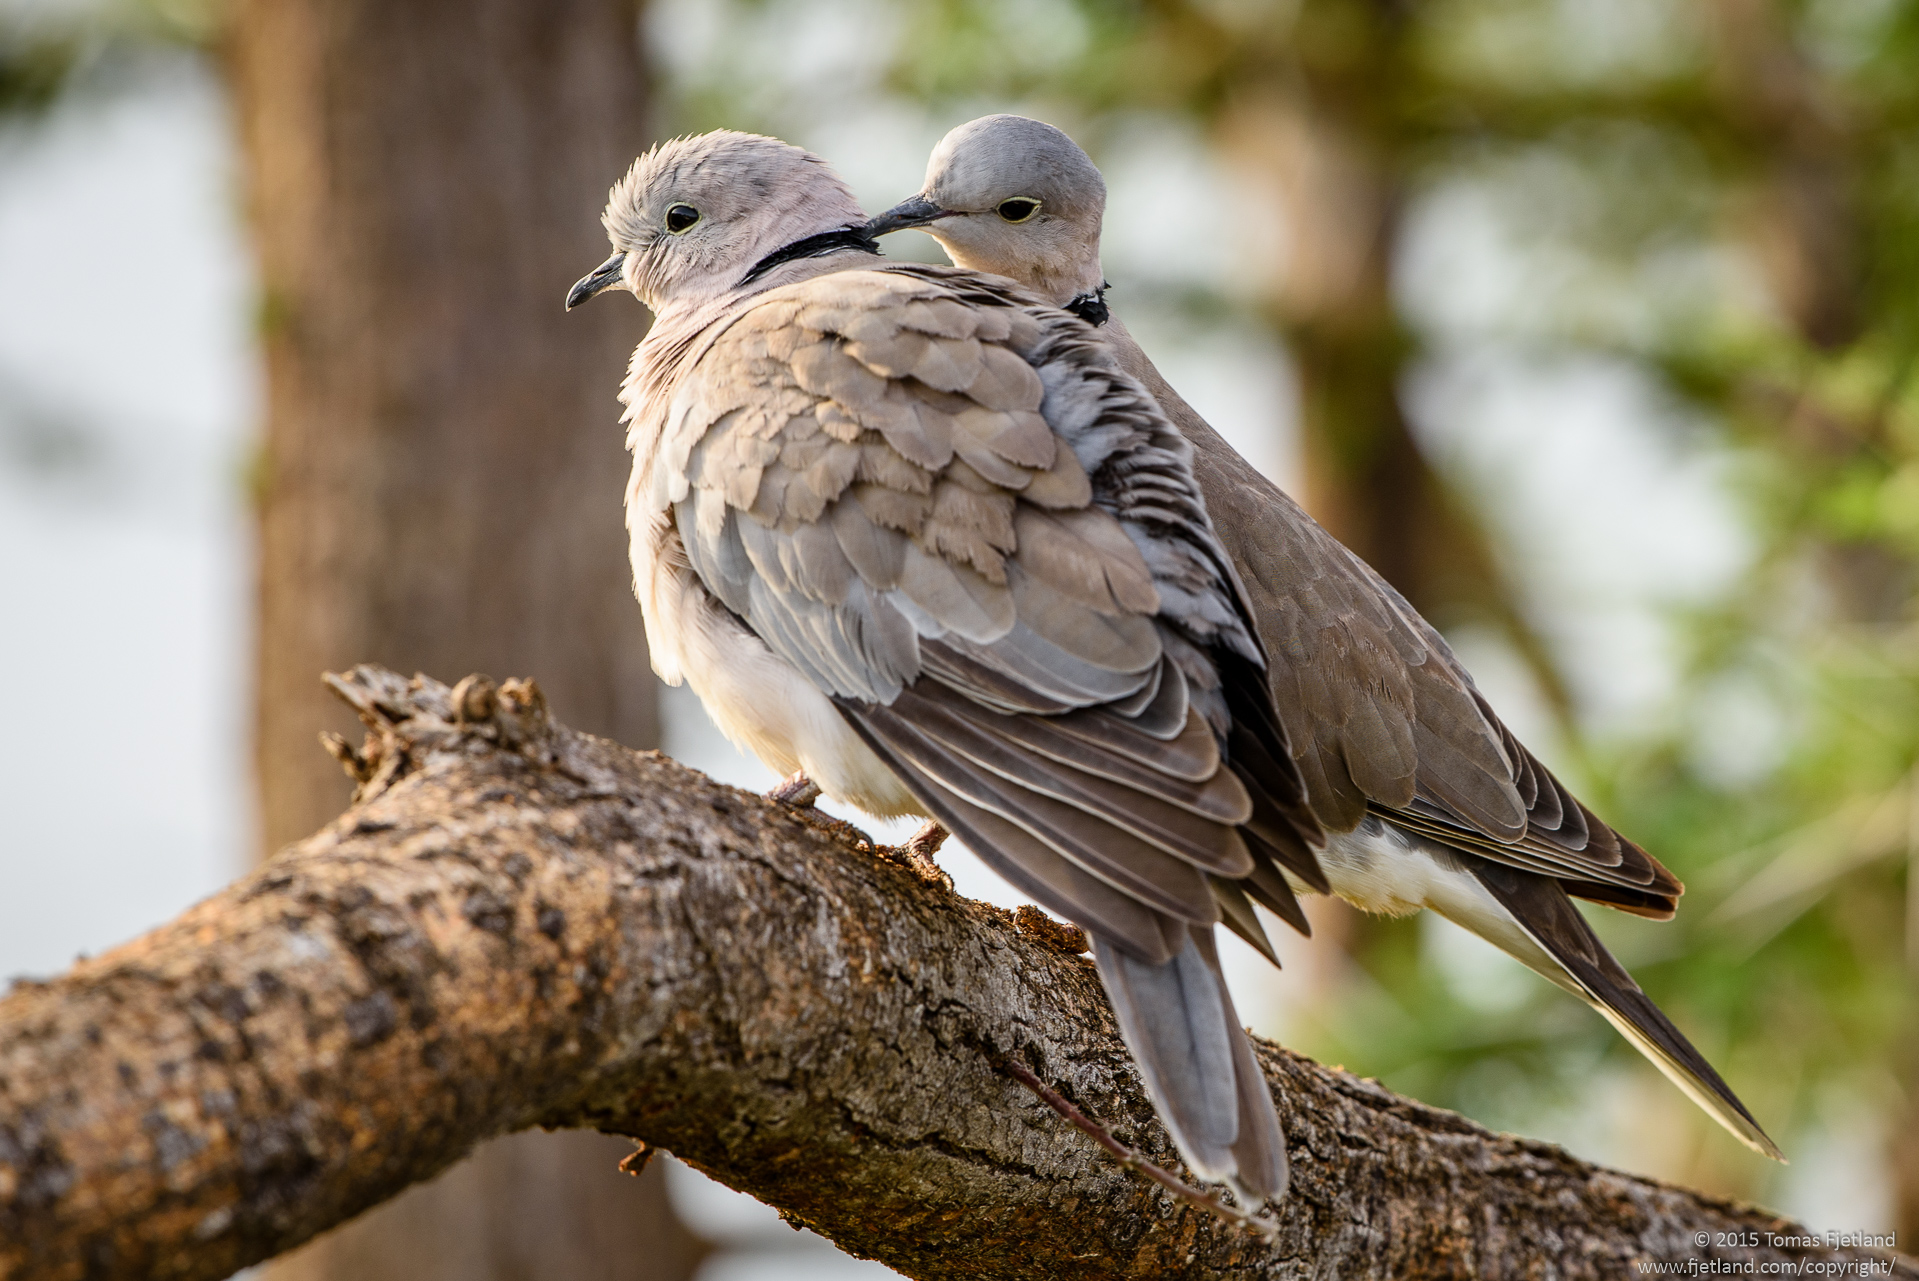 Two Ring-necked doves acting like turtledoves in a tree in Samburu.